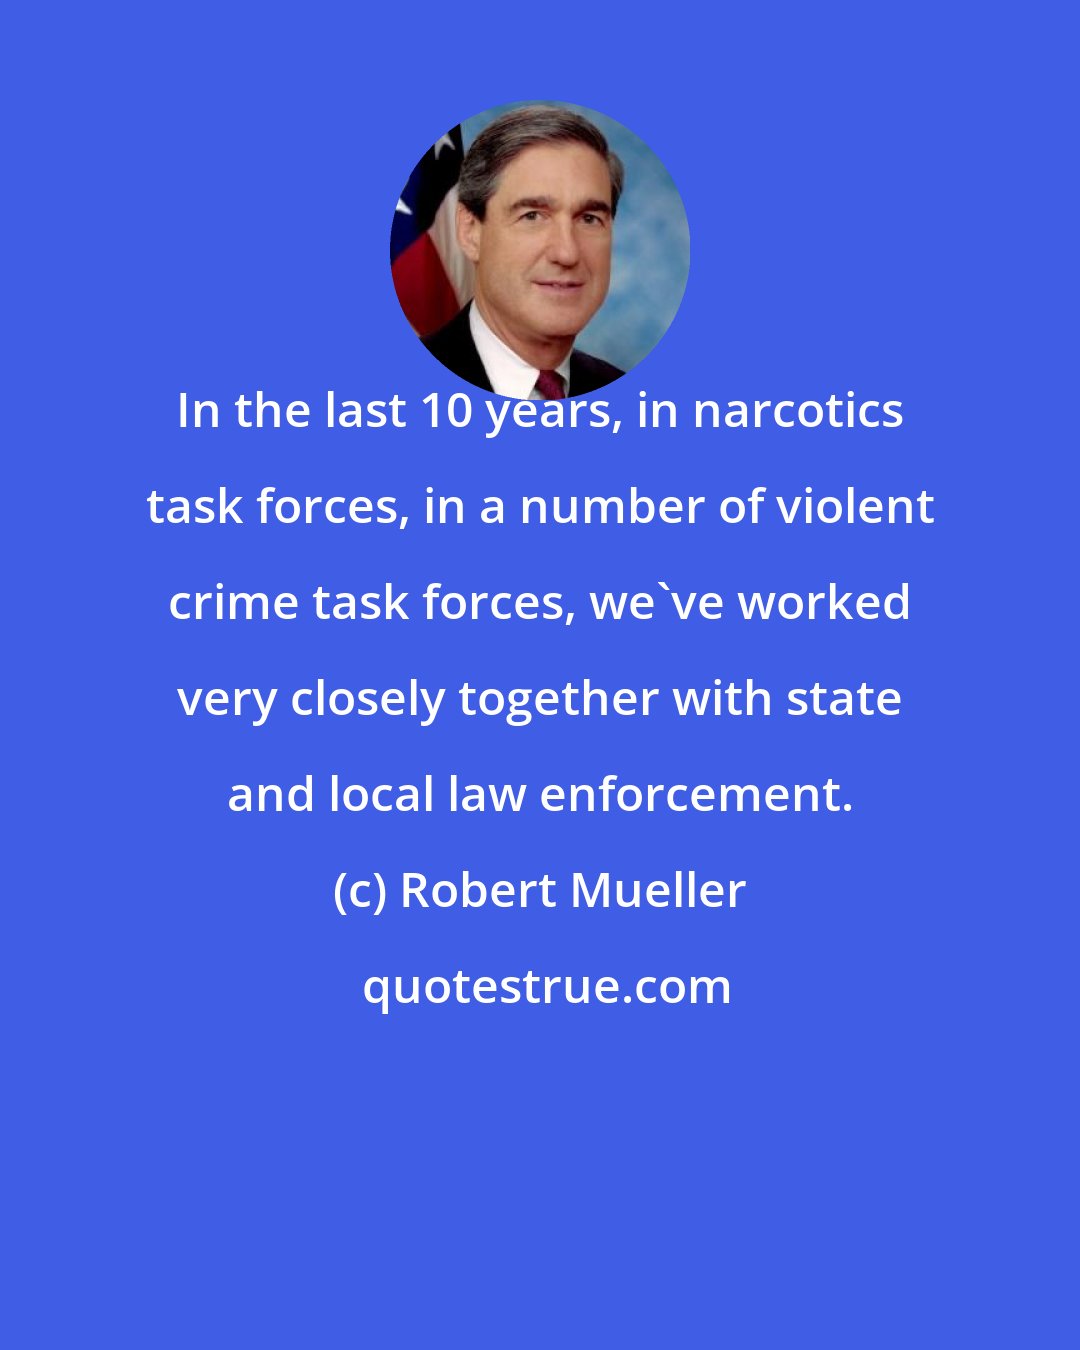 Robert Mueller: In the last 10 years, in narcotics task forces, in a number of violent crime task forces, we've worked very closely together with state and local law enforcement.